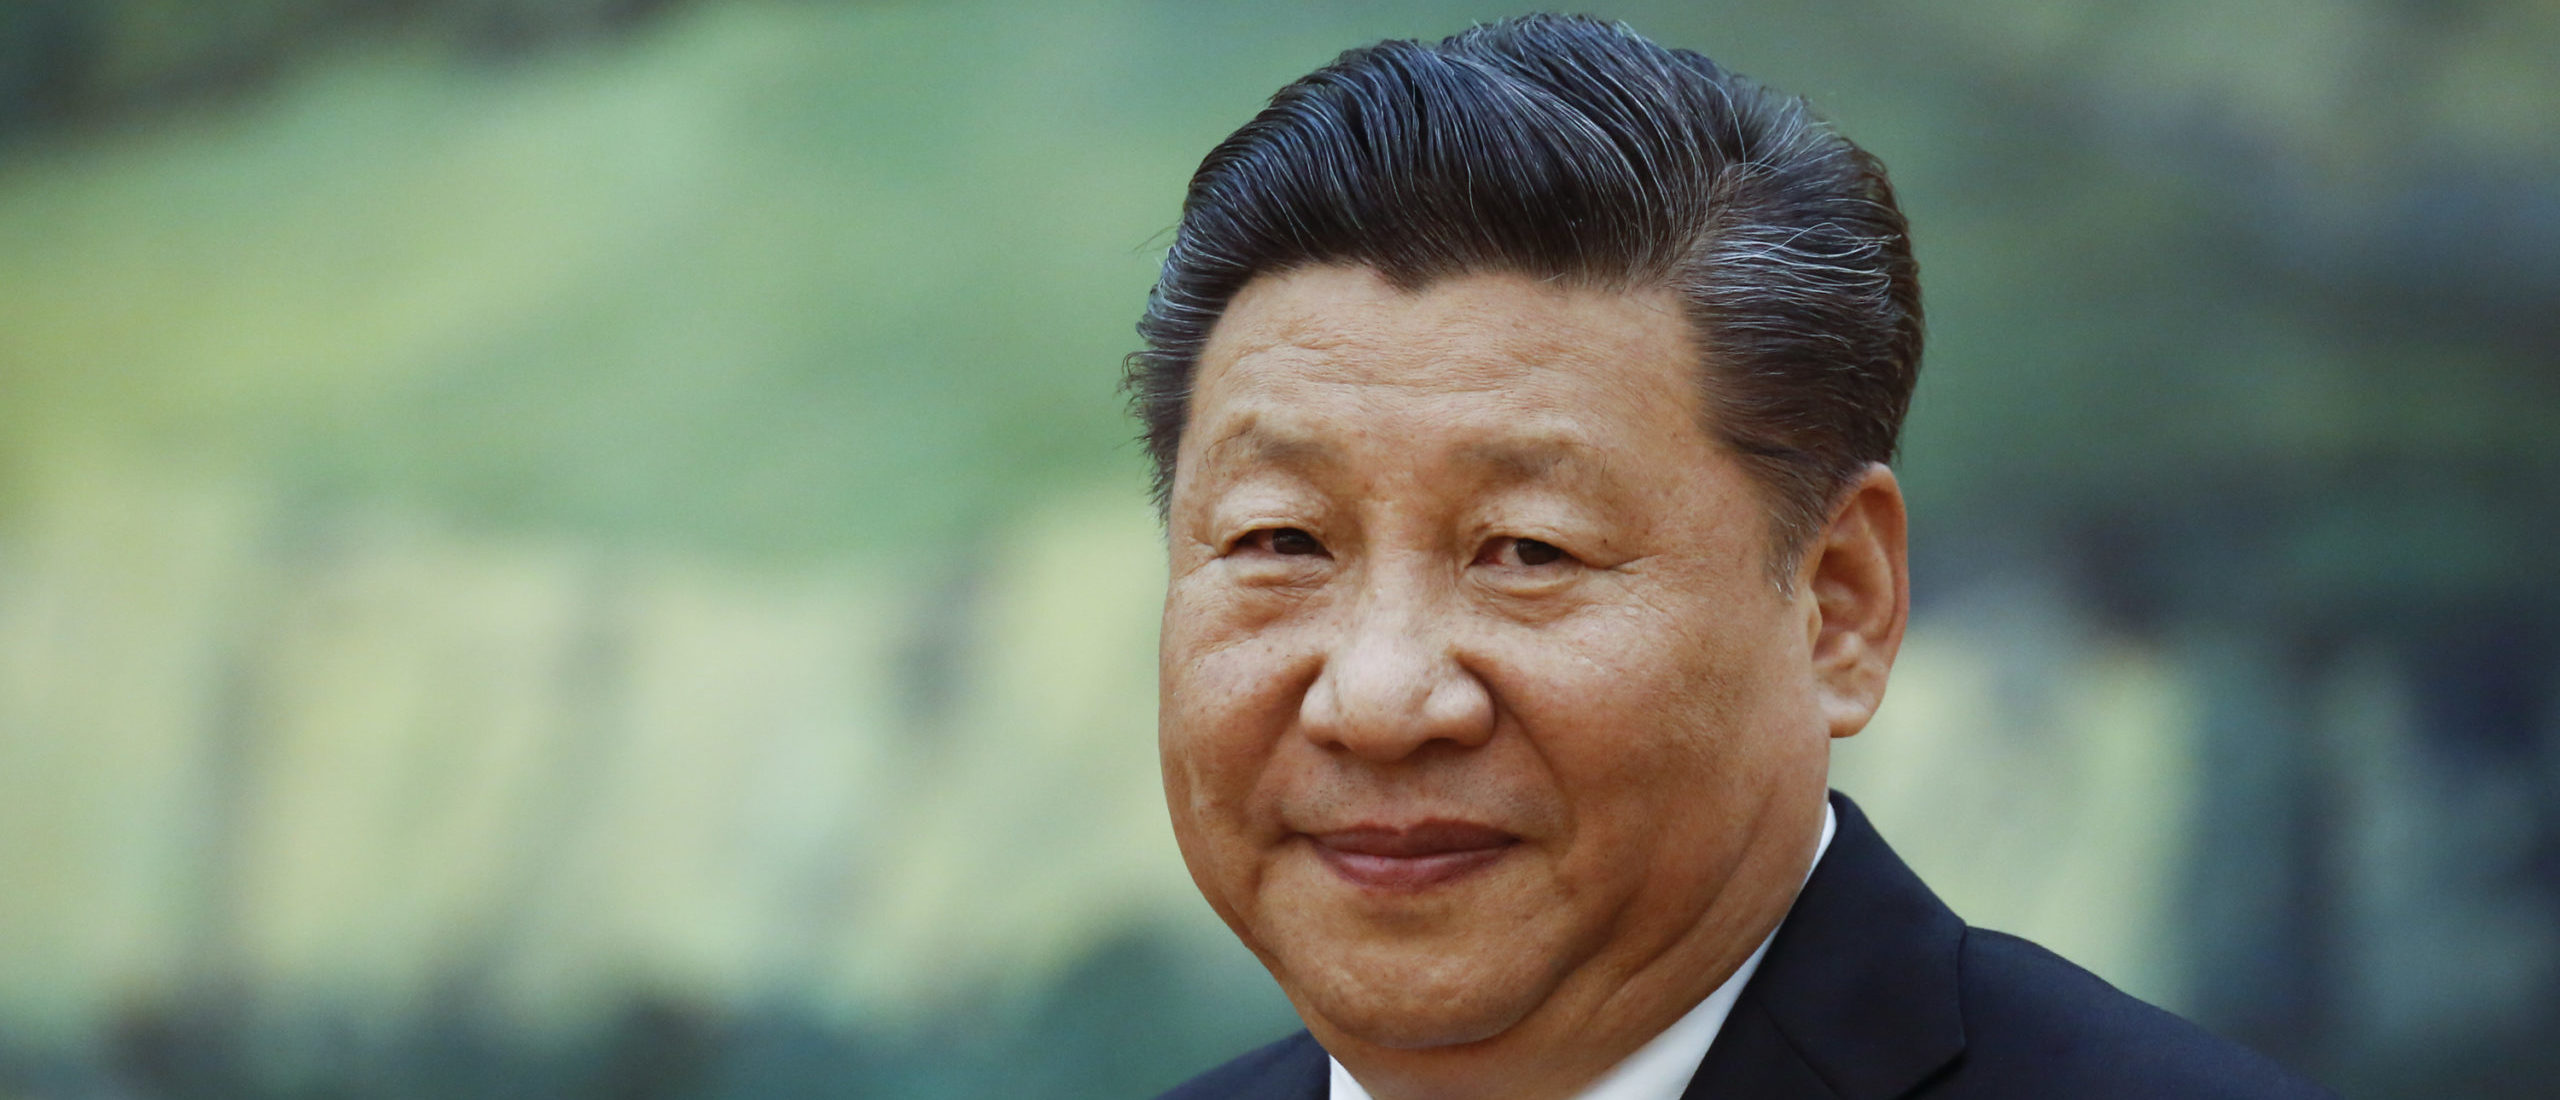 dailycaller.com - Michael Bastasch - BASTASCH: China Is Laughing At Us